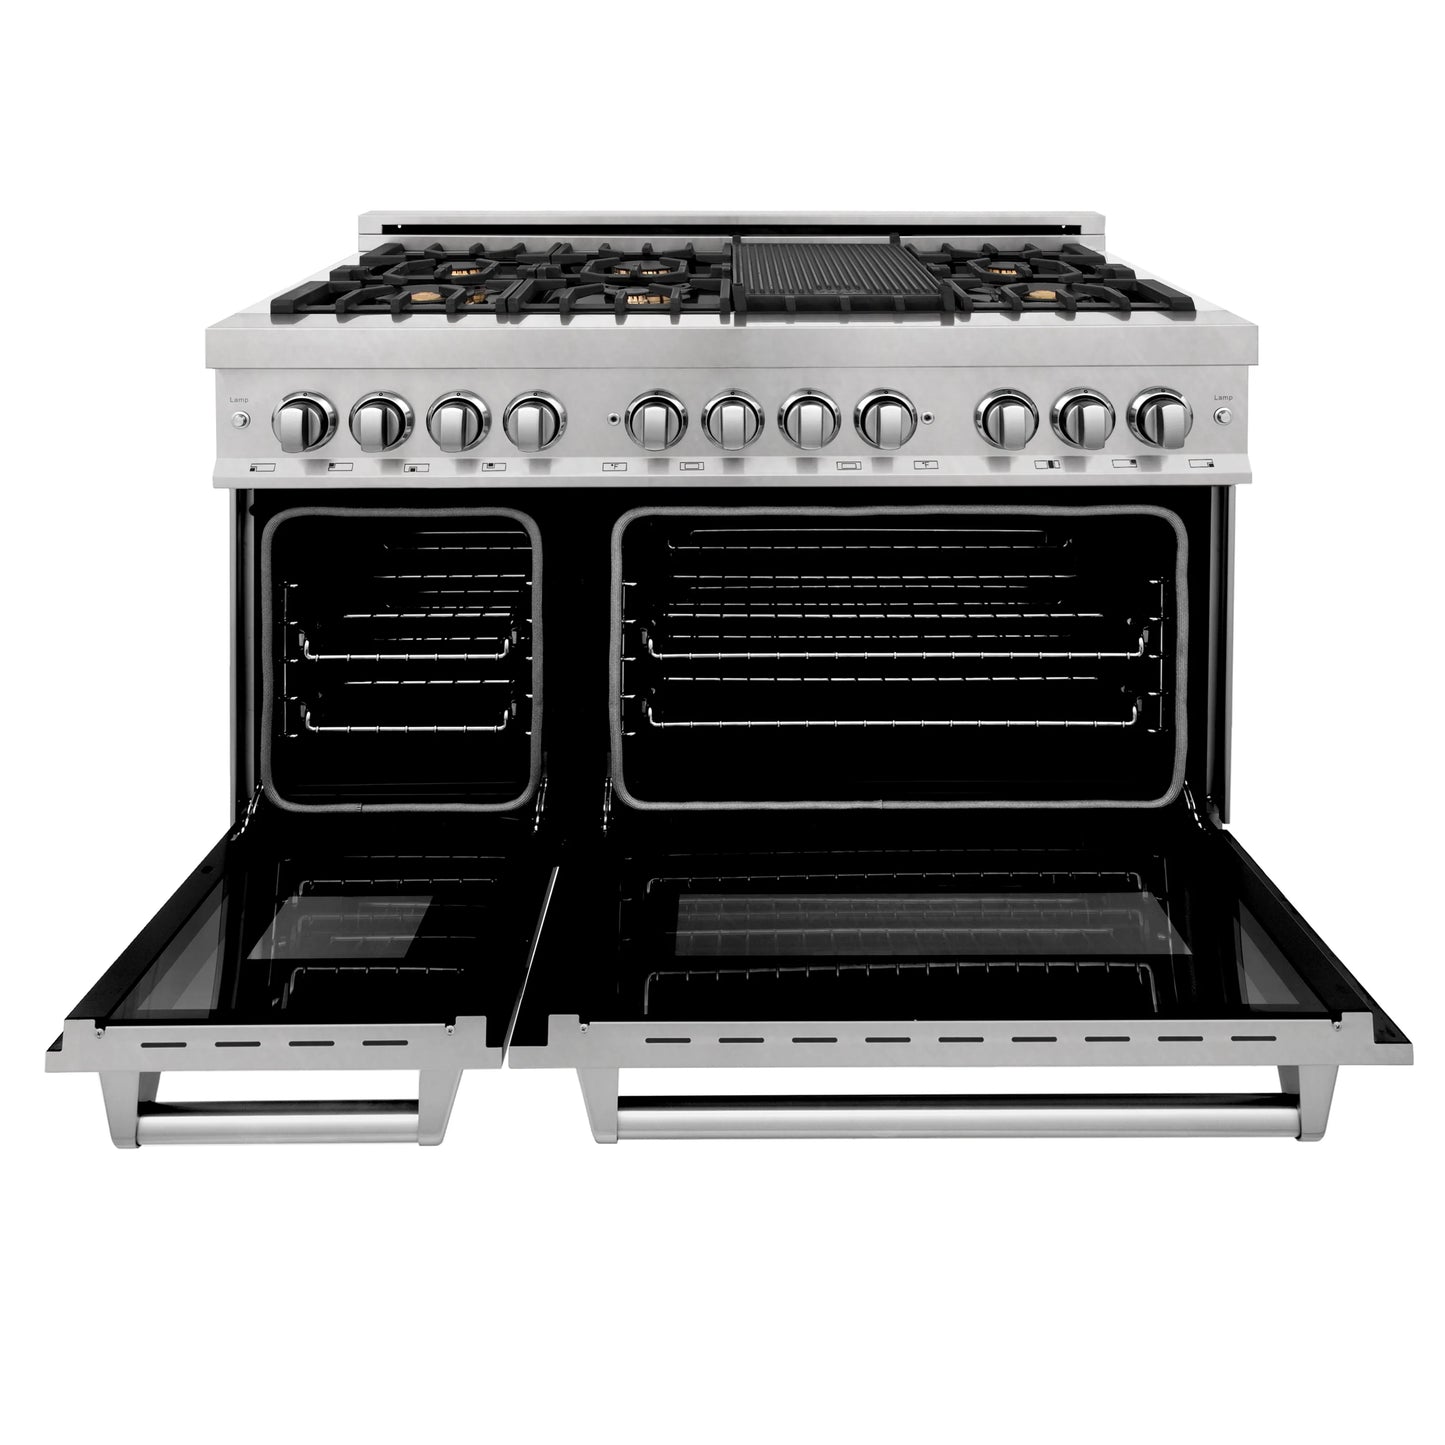 ZLINE 48 in. Dual Fuel Range with Gas Stove and Electric Oven in All Fingerprint Resistant Stainless Steel with Brass Burners (RAS-SN-BR-48)